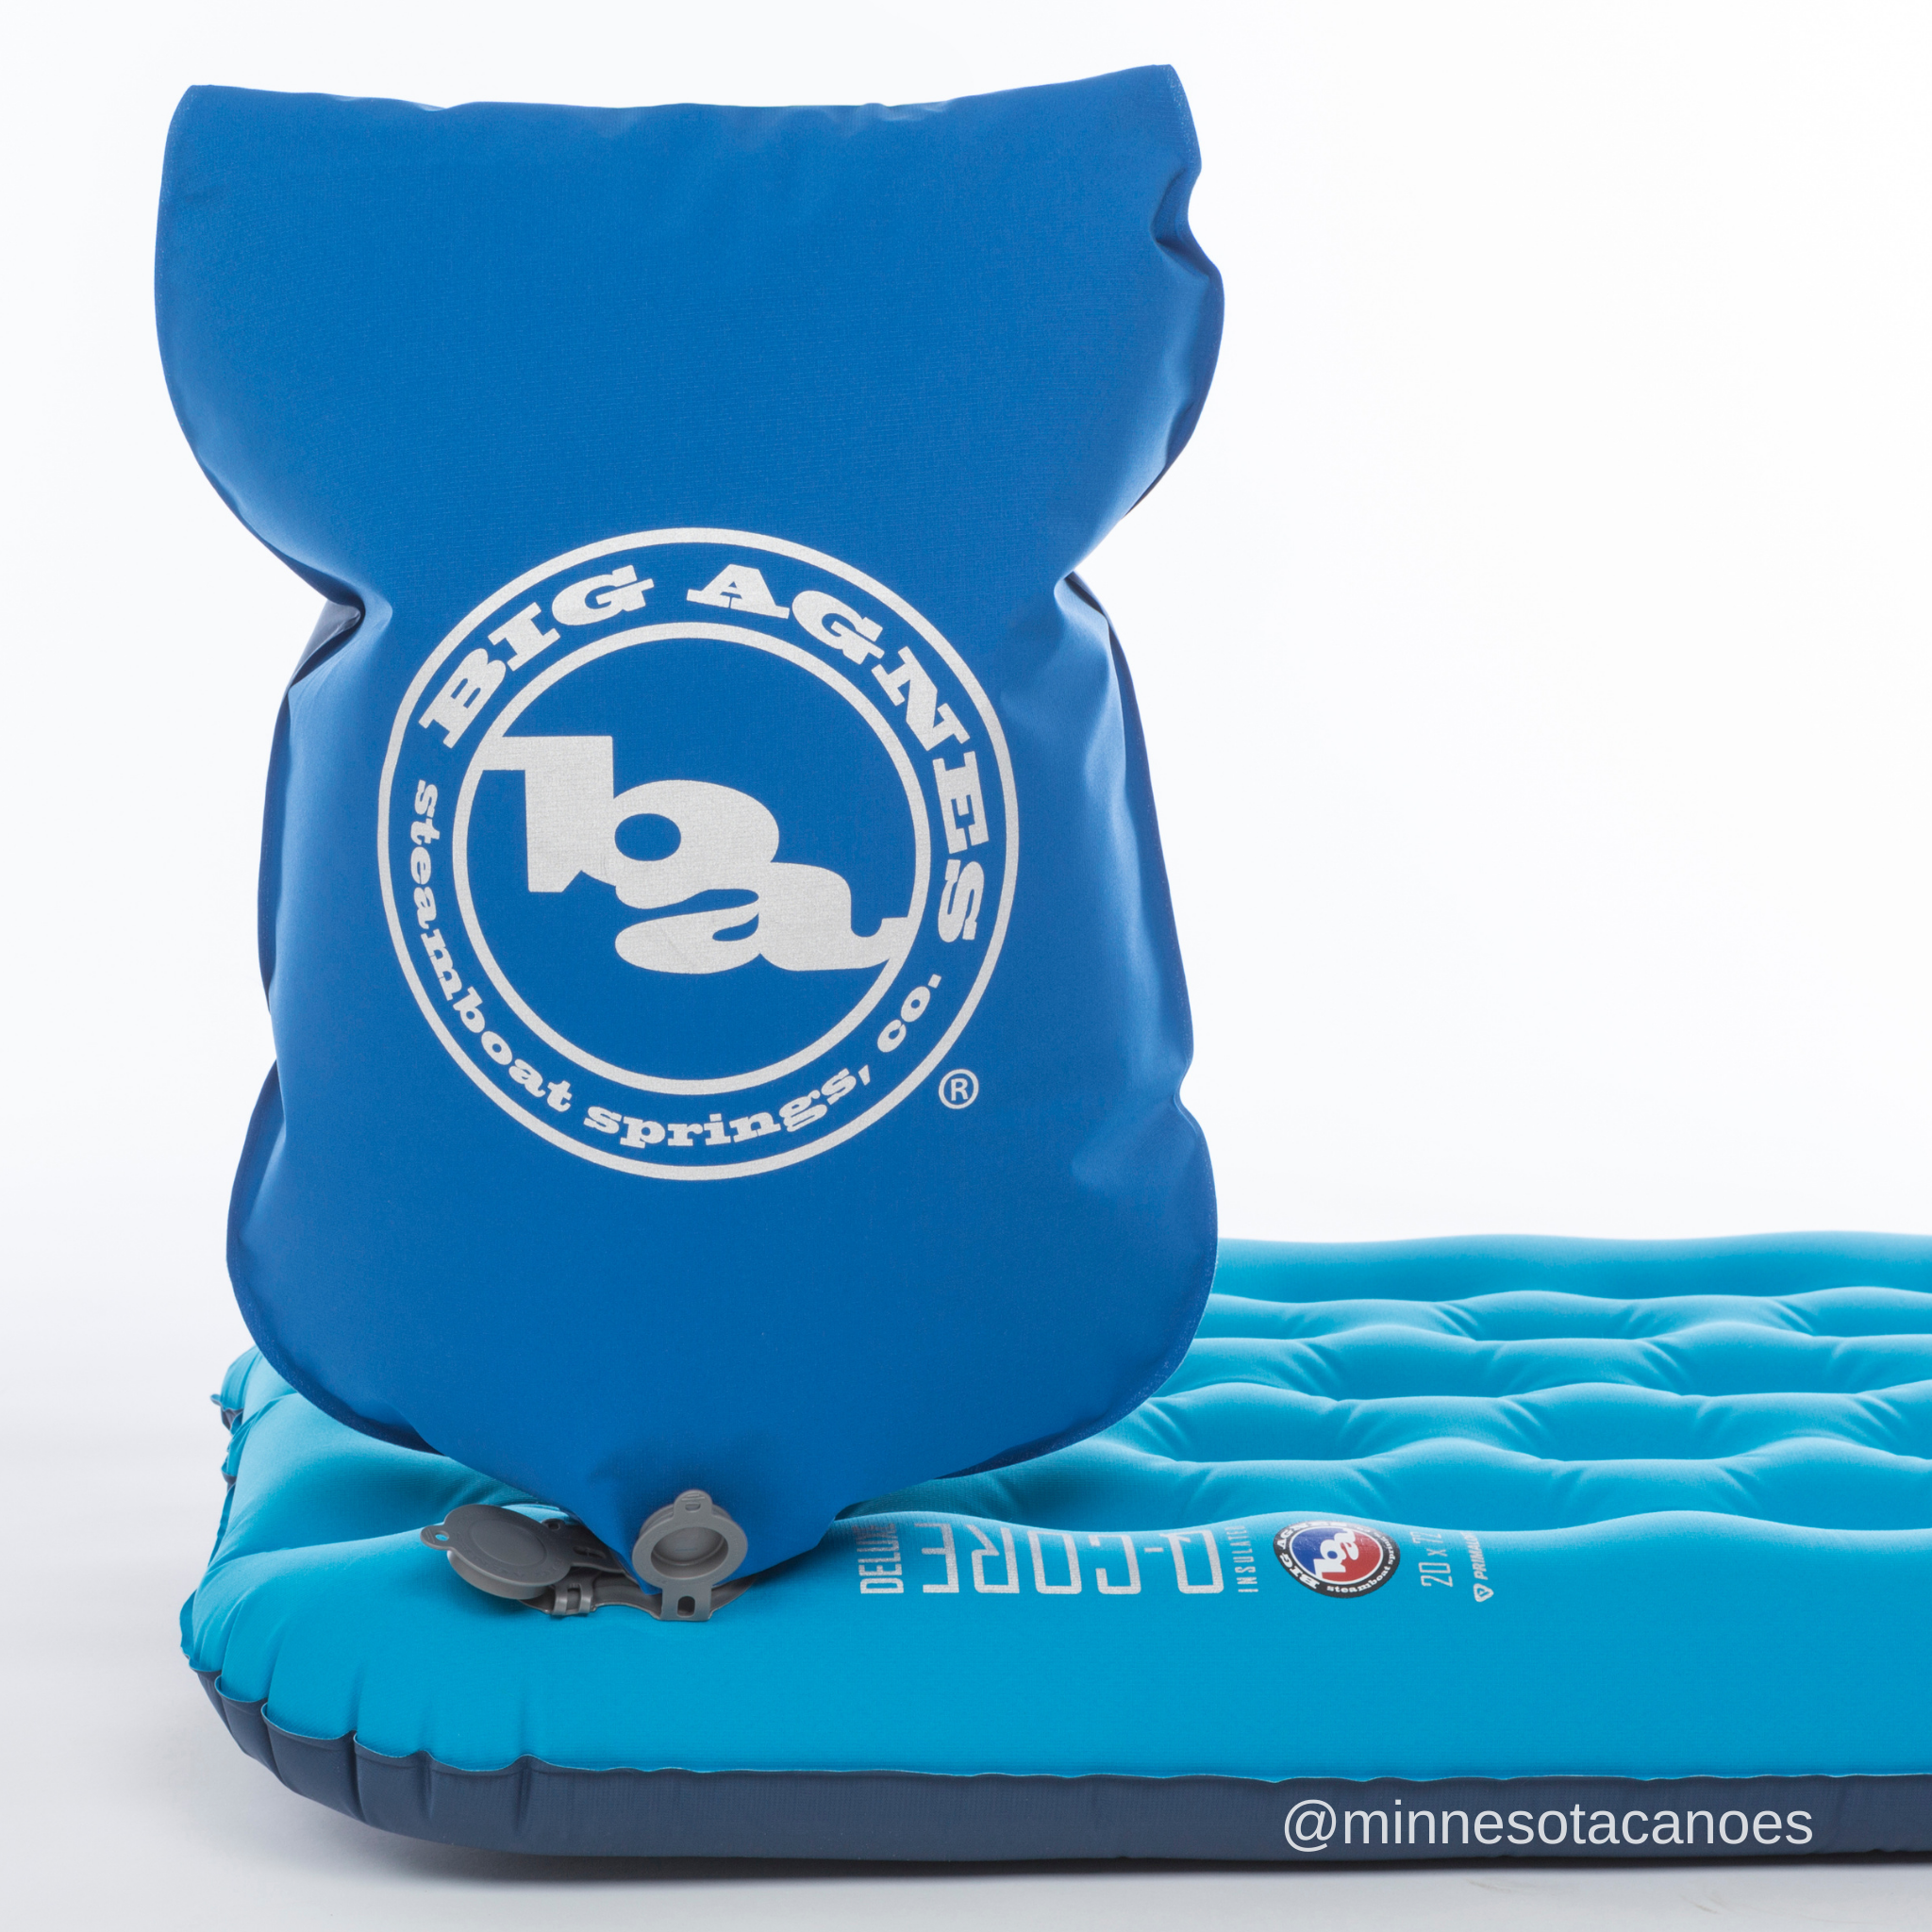 Insulated Q-Core Deluxe Sleeping Pad